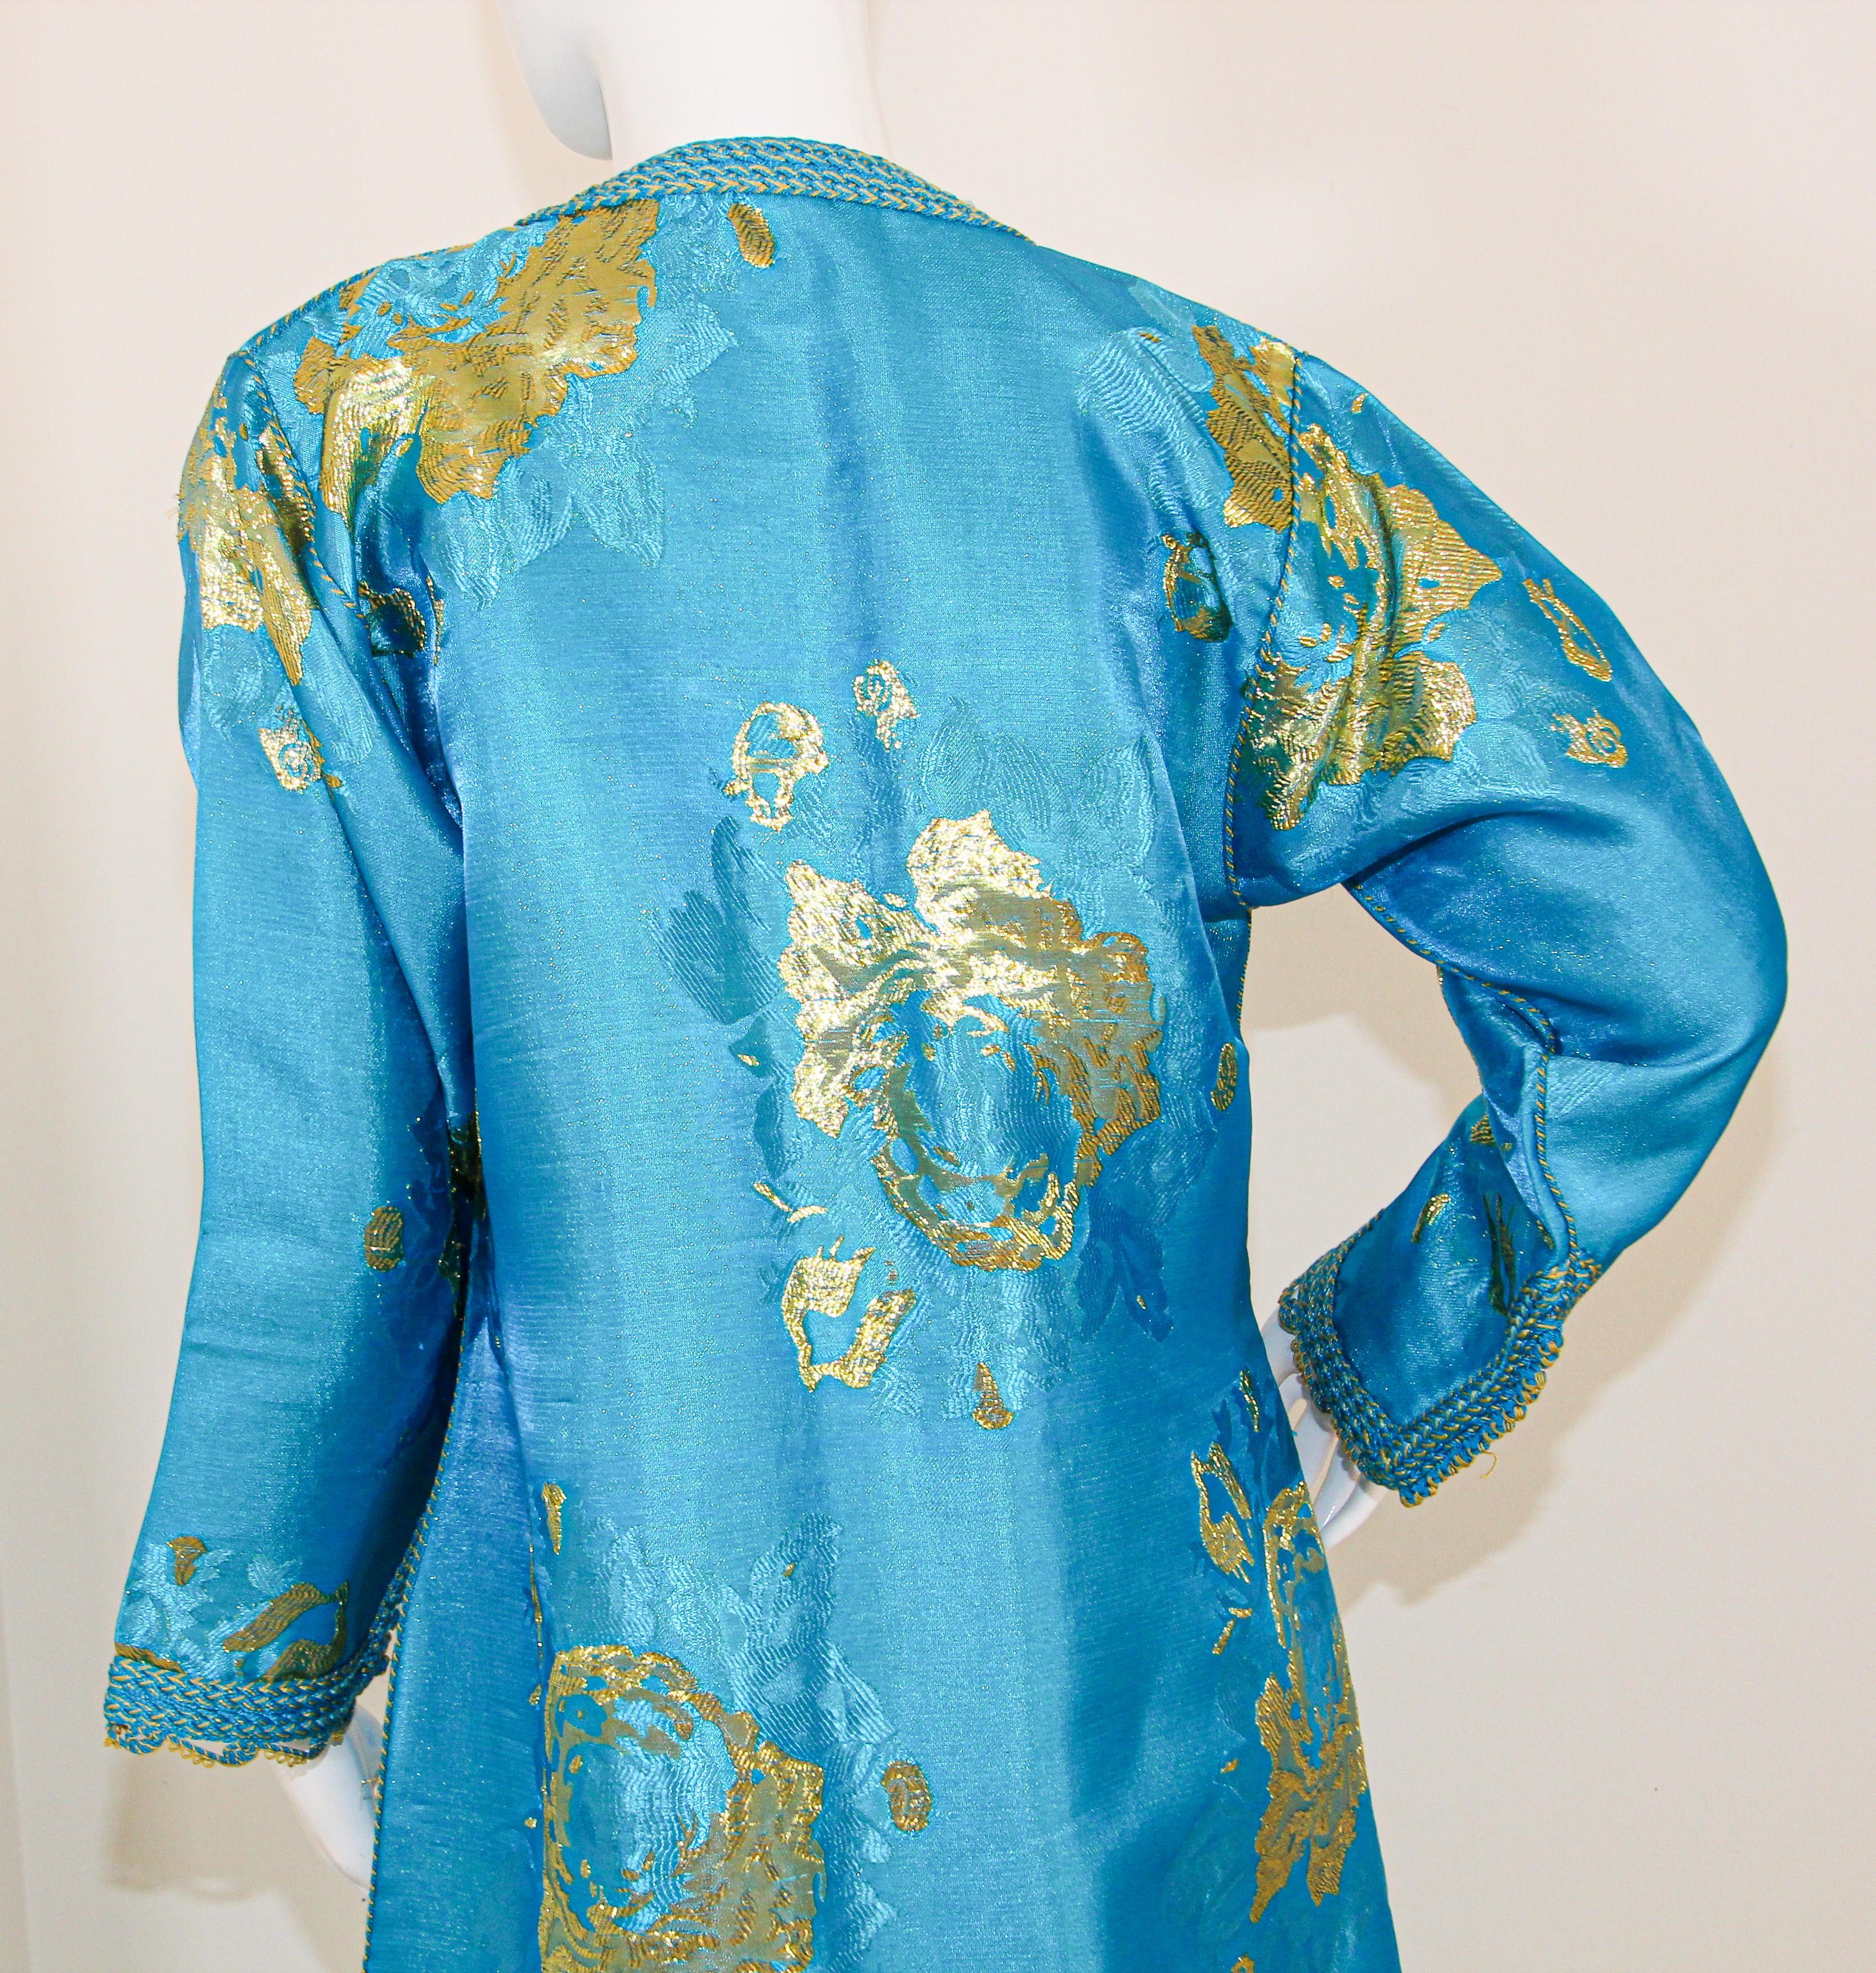 Moroccan Kaftan in Turquoise and Gold Floral Brocade Metallic Lame 5